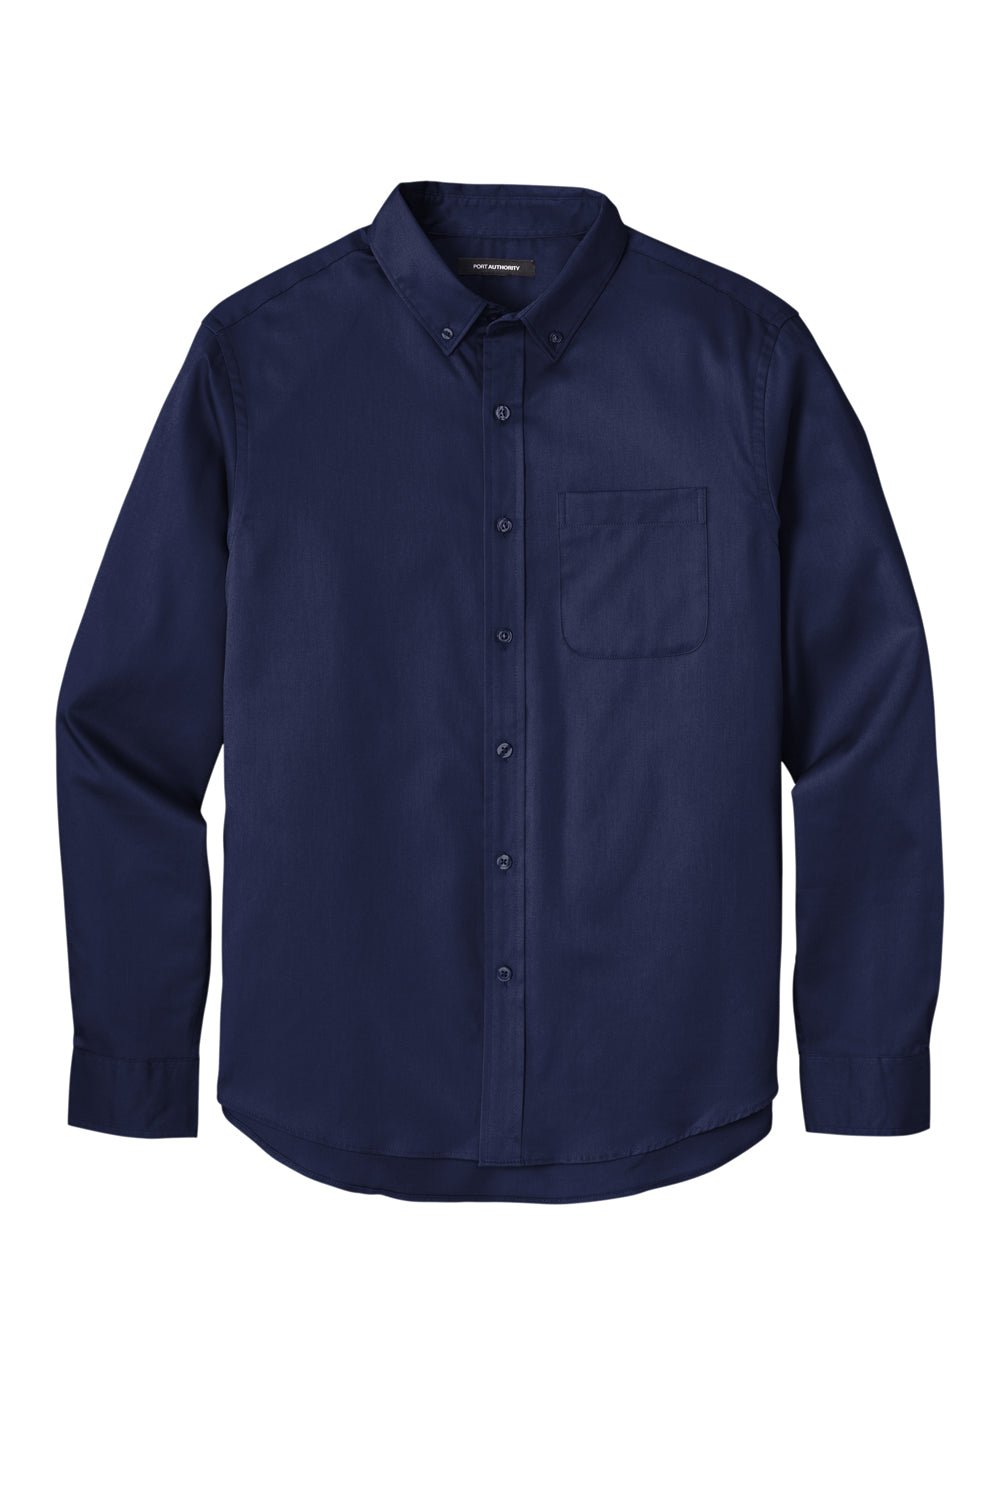 Port Authority W808 SuperPro Wrinkle Resistant React Long Sleeve Button Down Shirt w/ Pocket True Navy Blue Flat Front